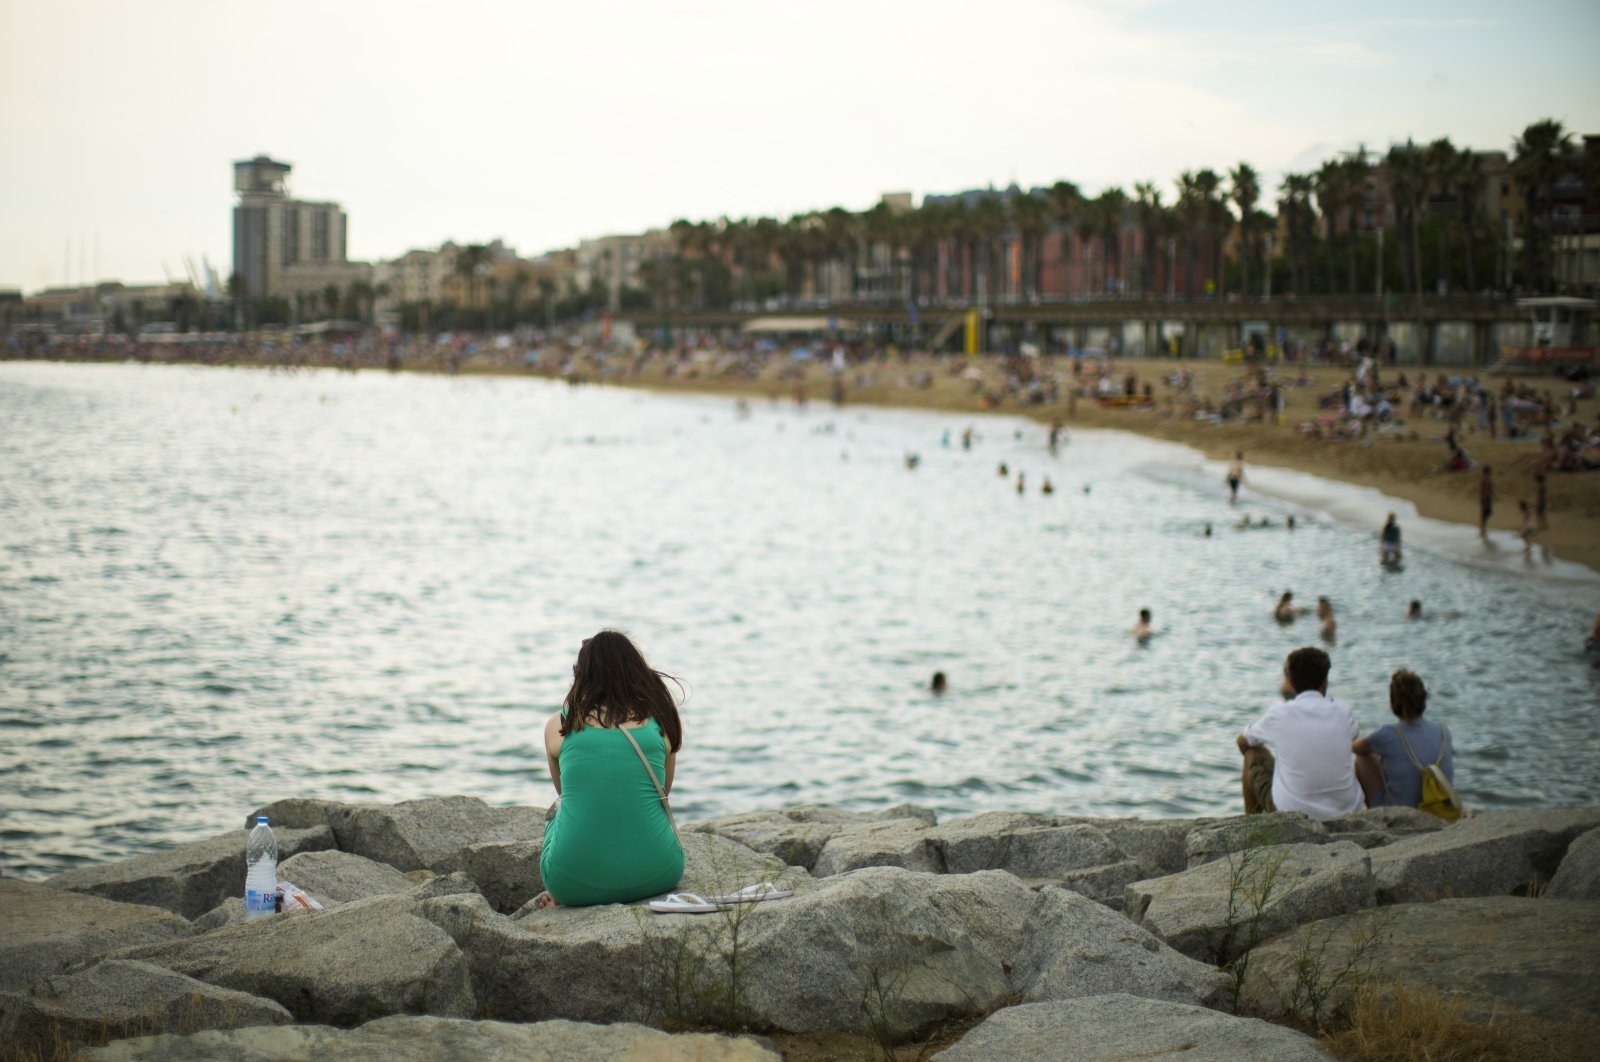 A woman sits by the beach in Barcelona, Spain, Thursday, July 28, 2022. Spain government&#039;s Equality Ministry launched a summer campaign Thursday encouraging women to reject &quot;stereotypes&quot; and &quot;aesthetical violence,&quot; a reference to social pressure some women feel to conform to beauty ideals. (AP Photo)